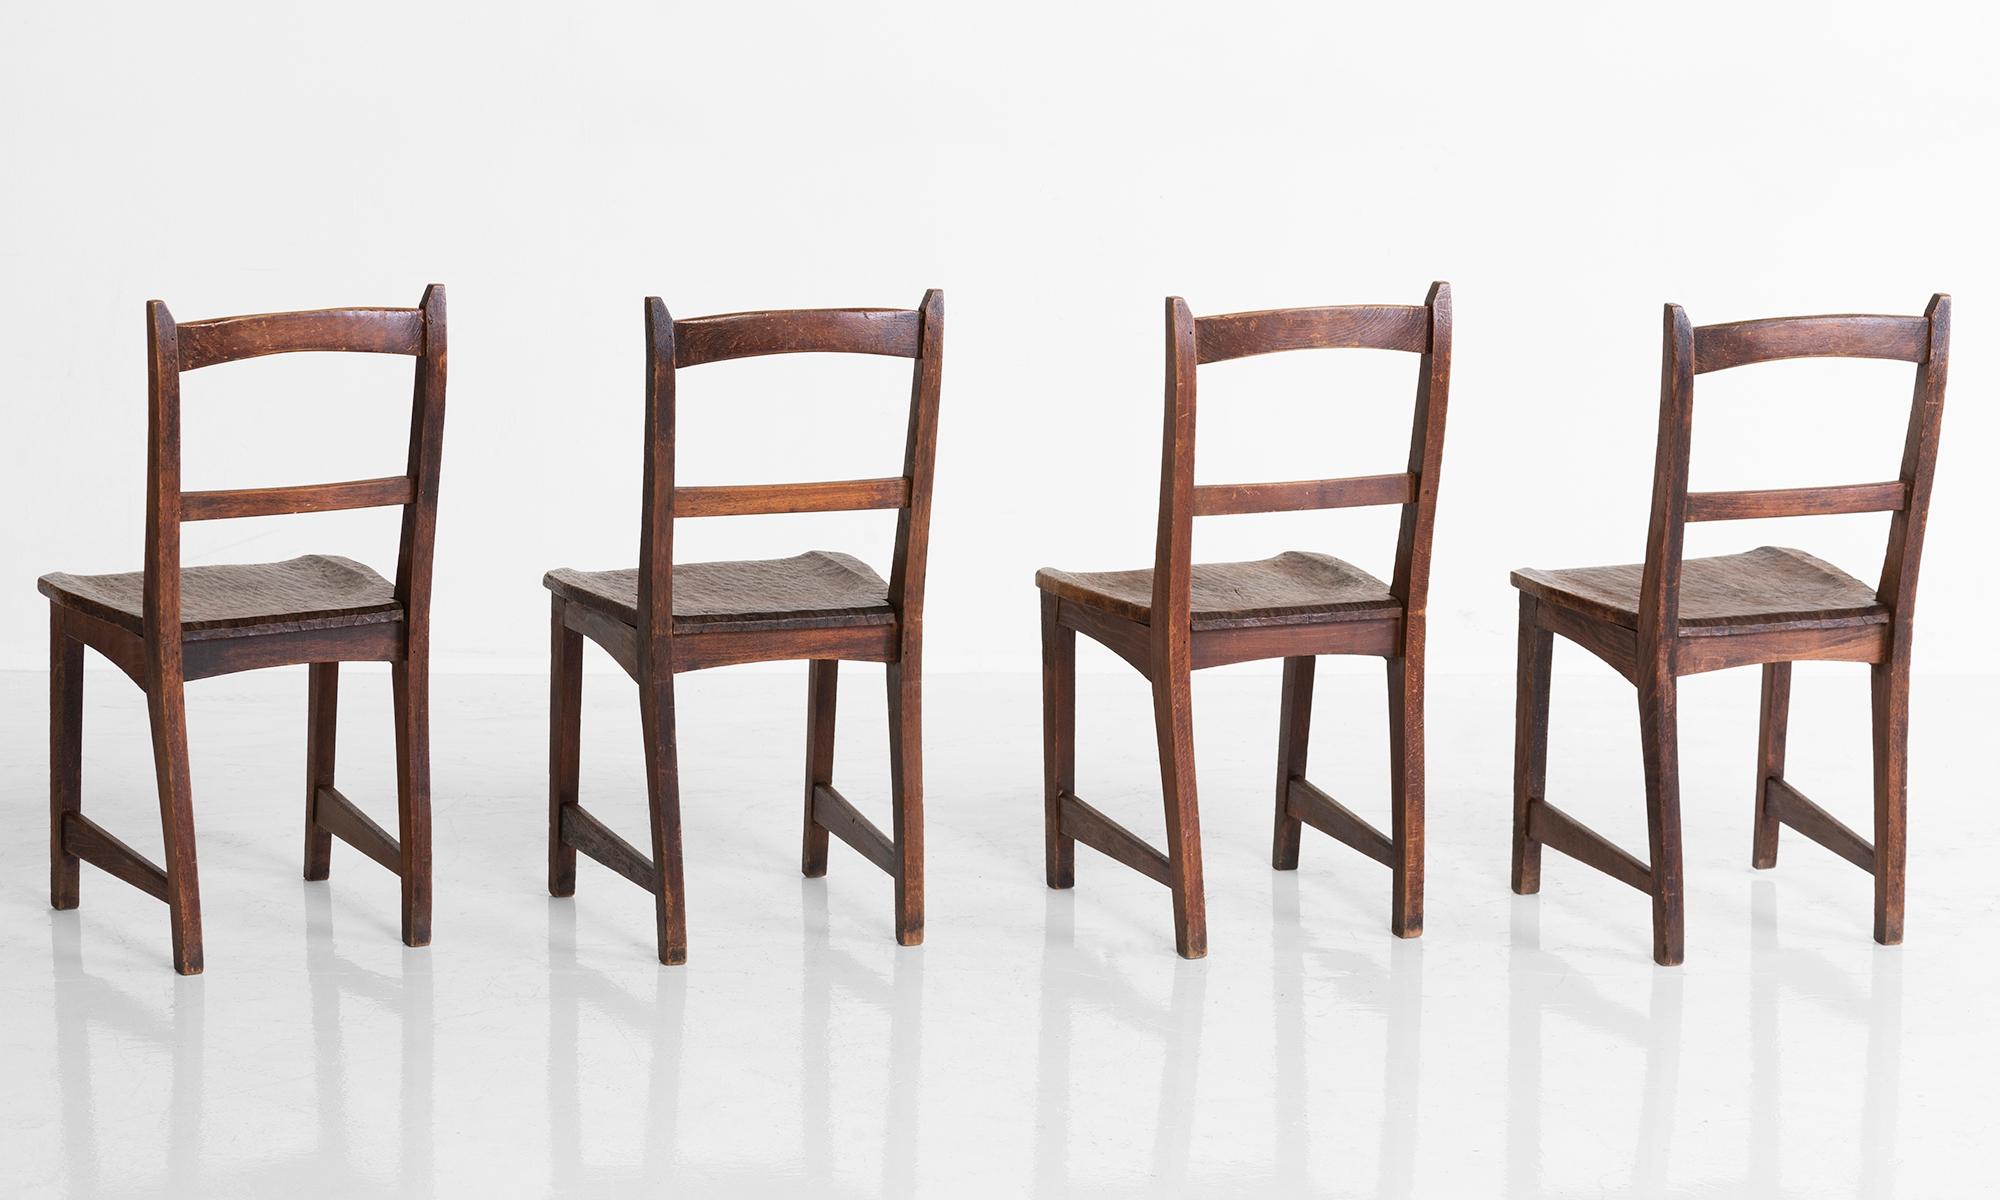 Made in Sycamore and beech with hand carved seats. Recovered from the Rudolf Steiner School in Northern England.